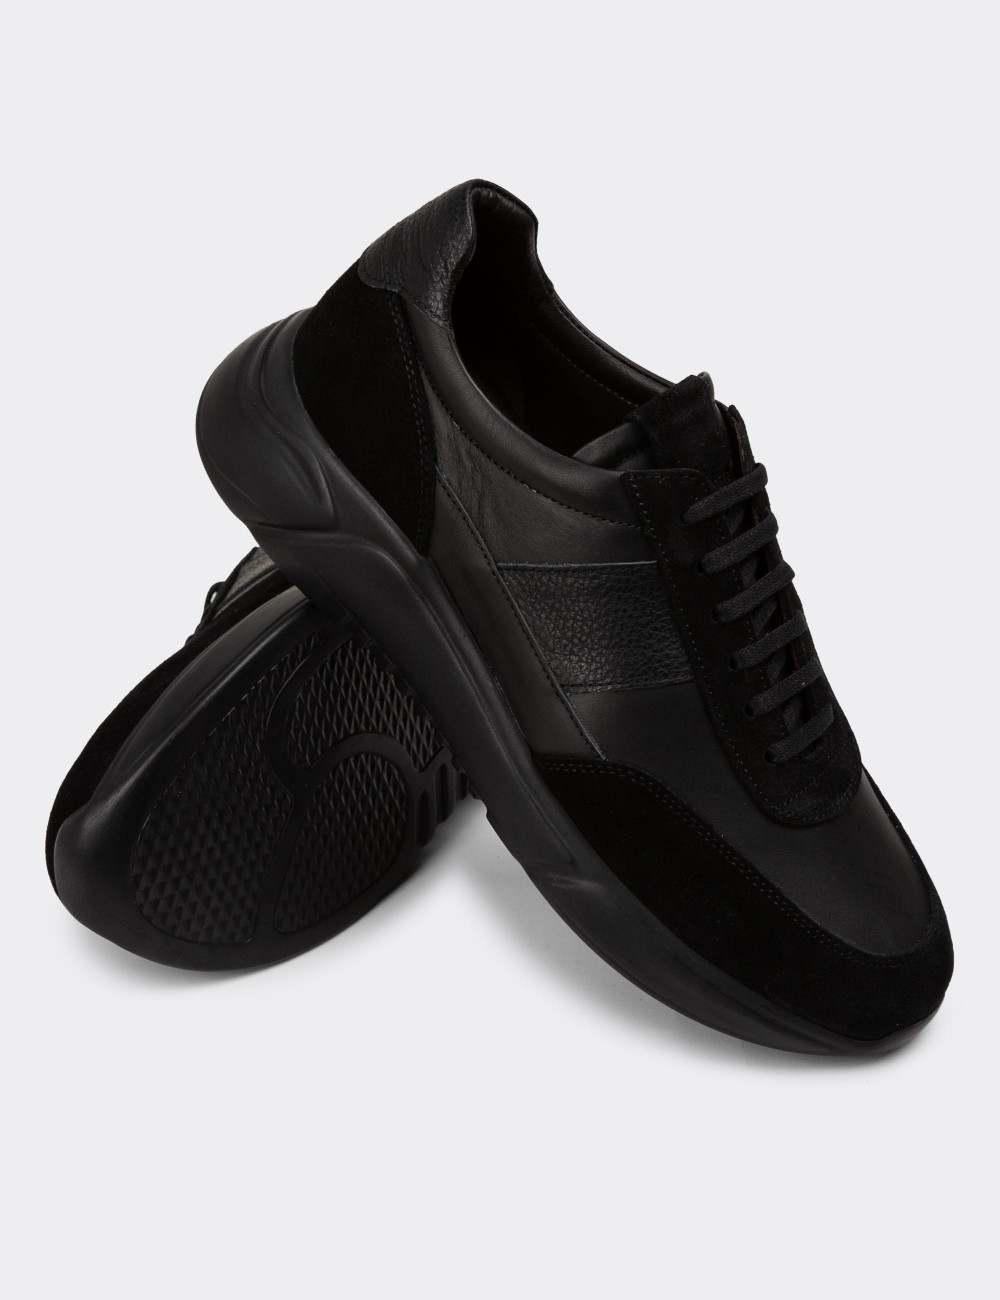 Black Suede Leather Sneakers - 01963MSYHE02